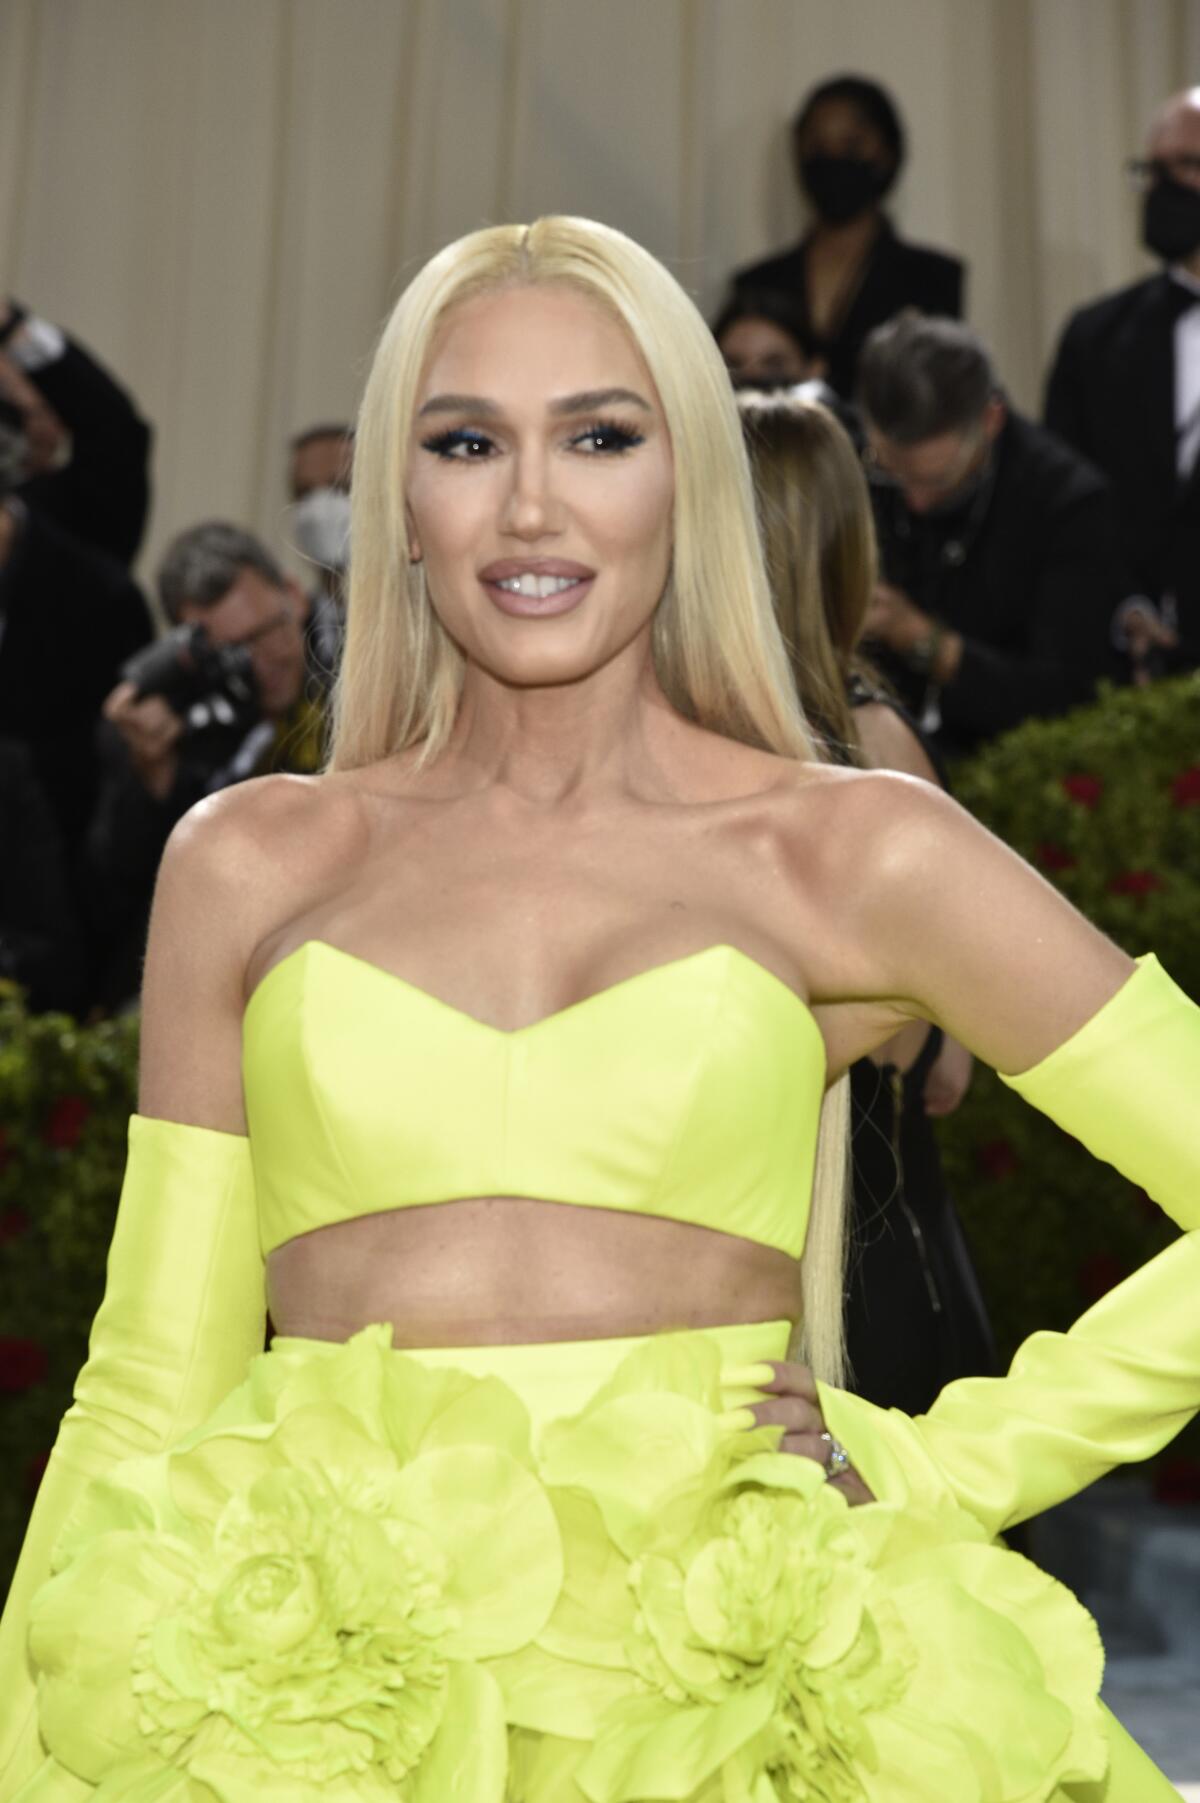 A blond woman poses with her hand on her hip while wearing a bright yellow two-piece gown with gloves